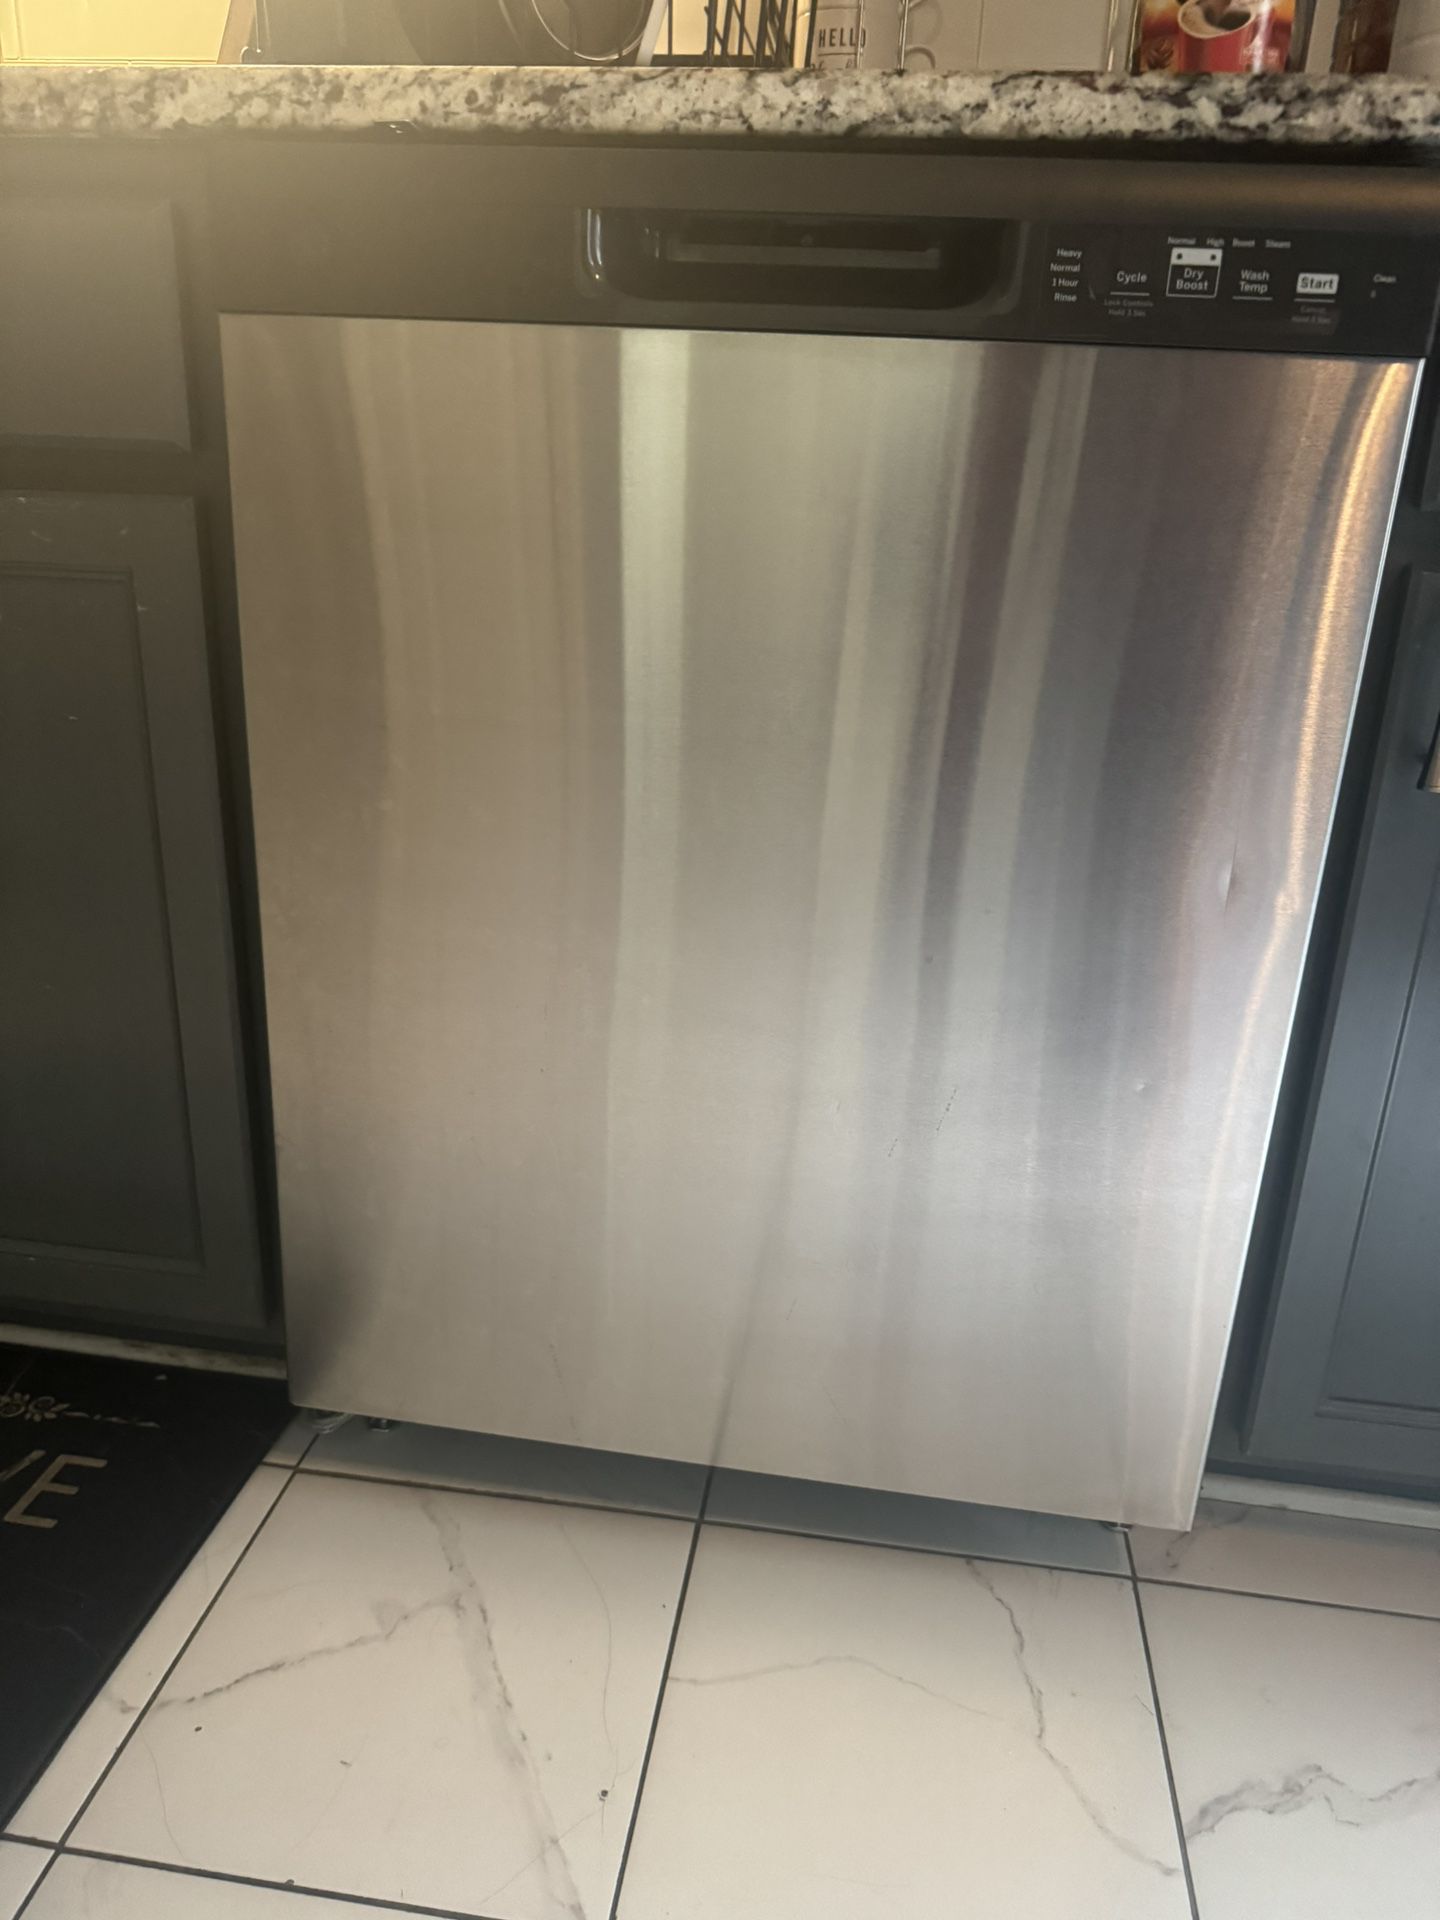 Brand New GE Dishwasher Never Used Stainless Steel 